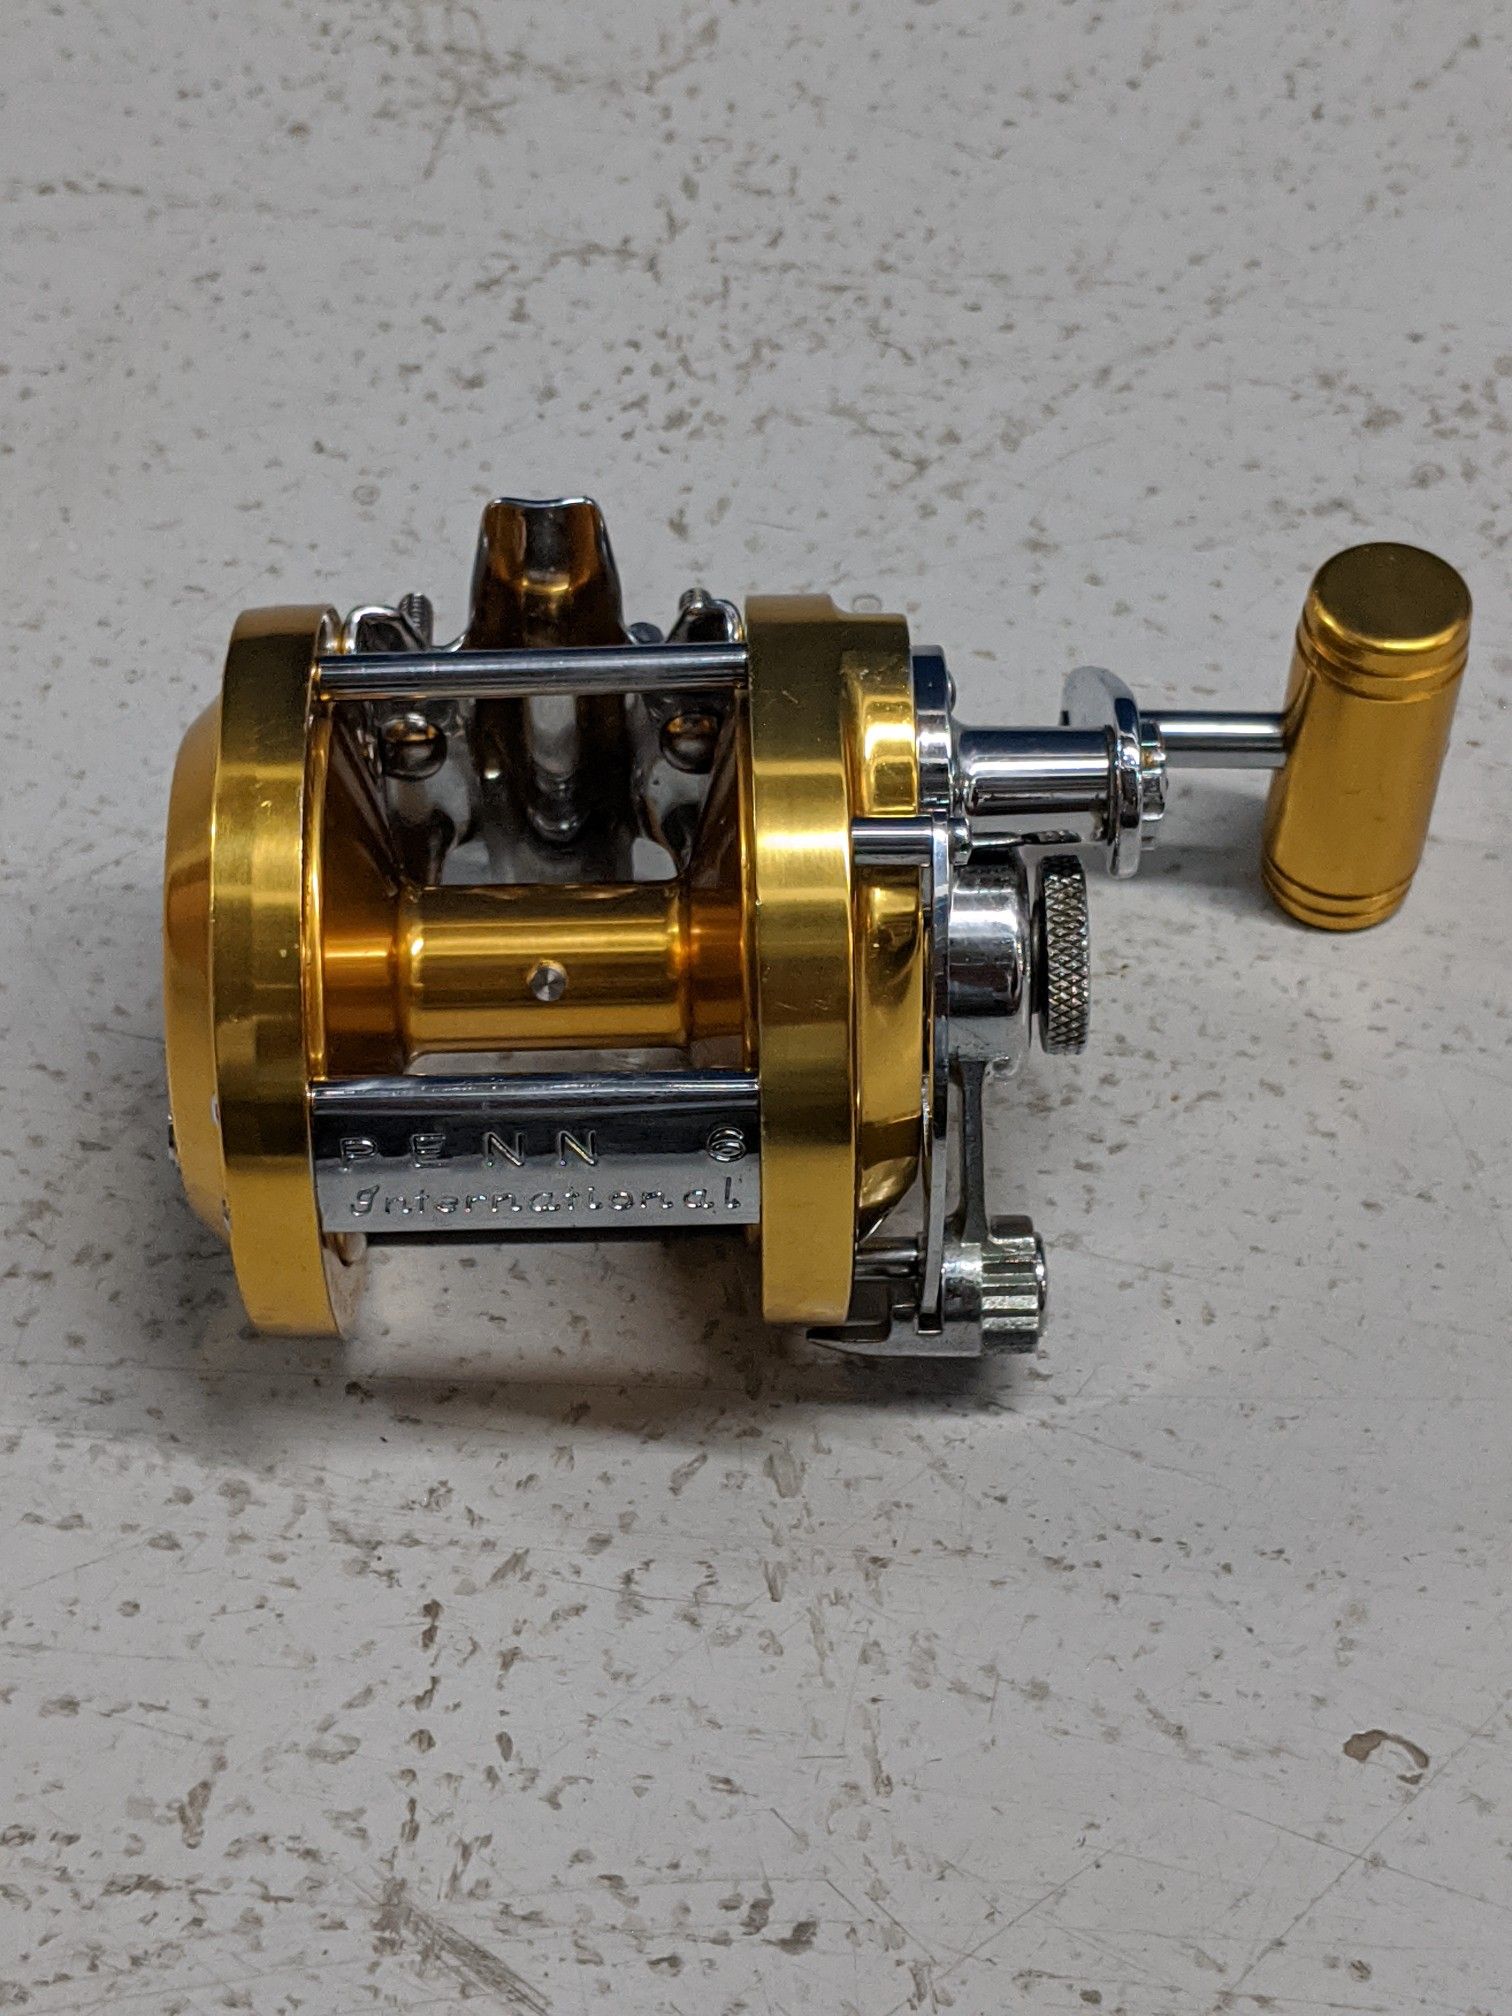 Rare Penn International 6 Conventional Reel. Serviced. Excellent Condition. Ready for fishing.